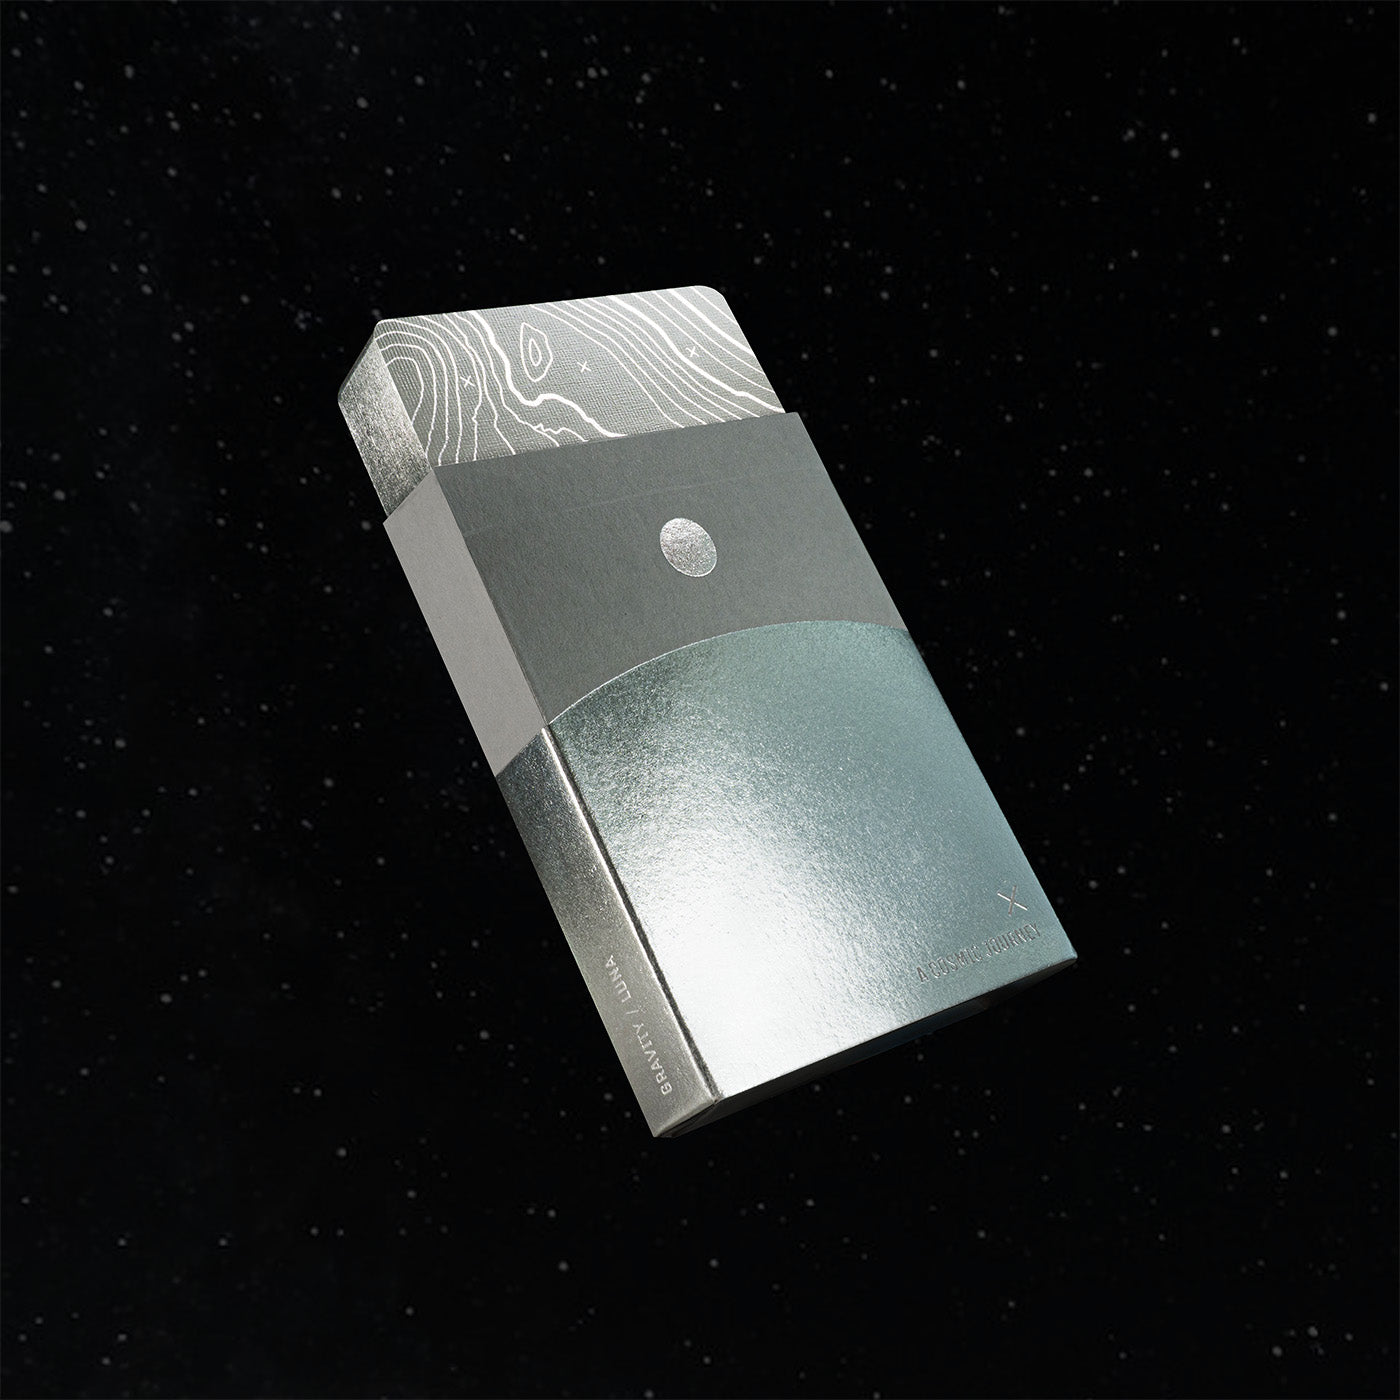 A deck of foiled playing cards floating in space